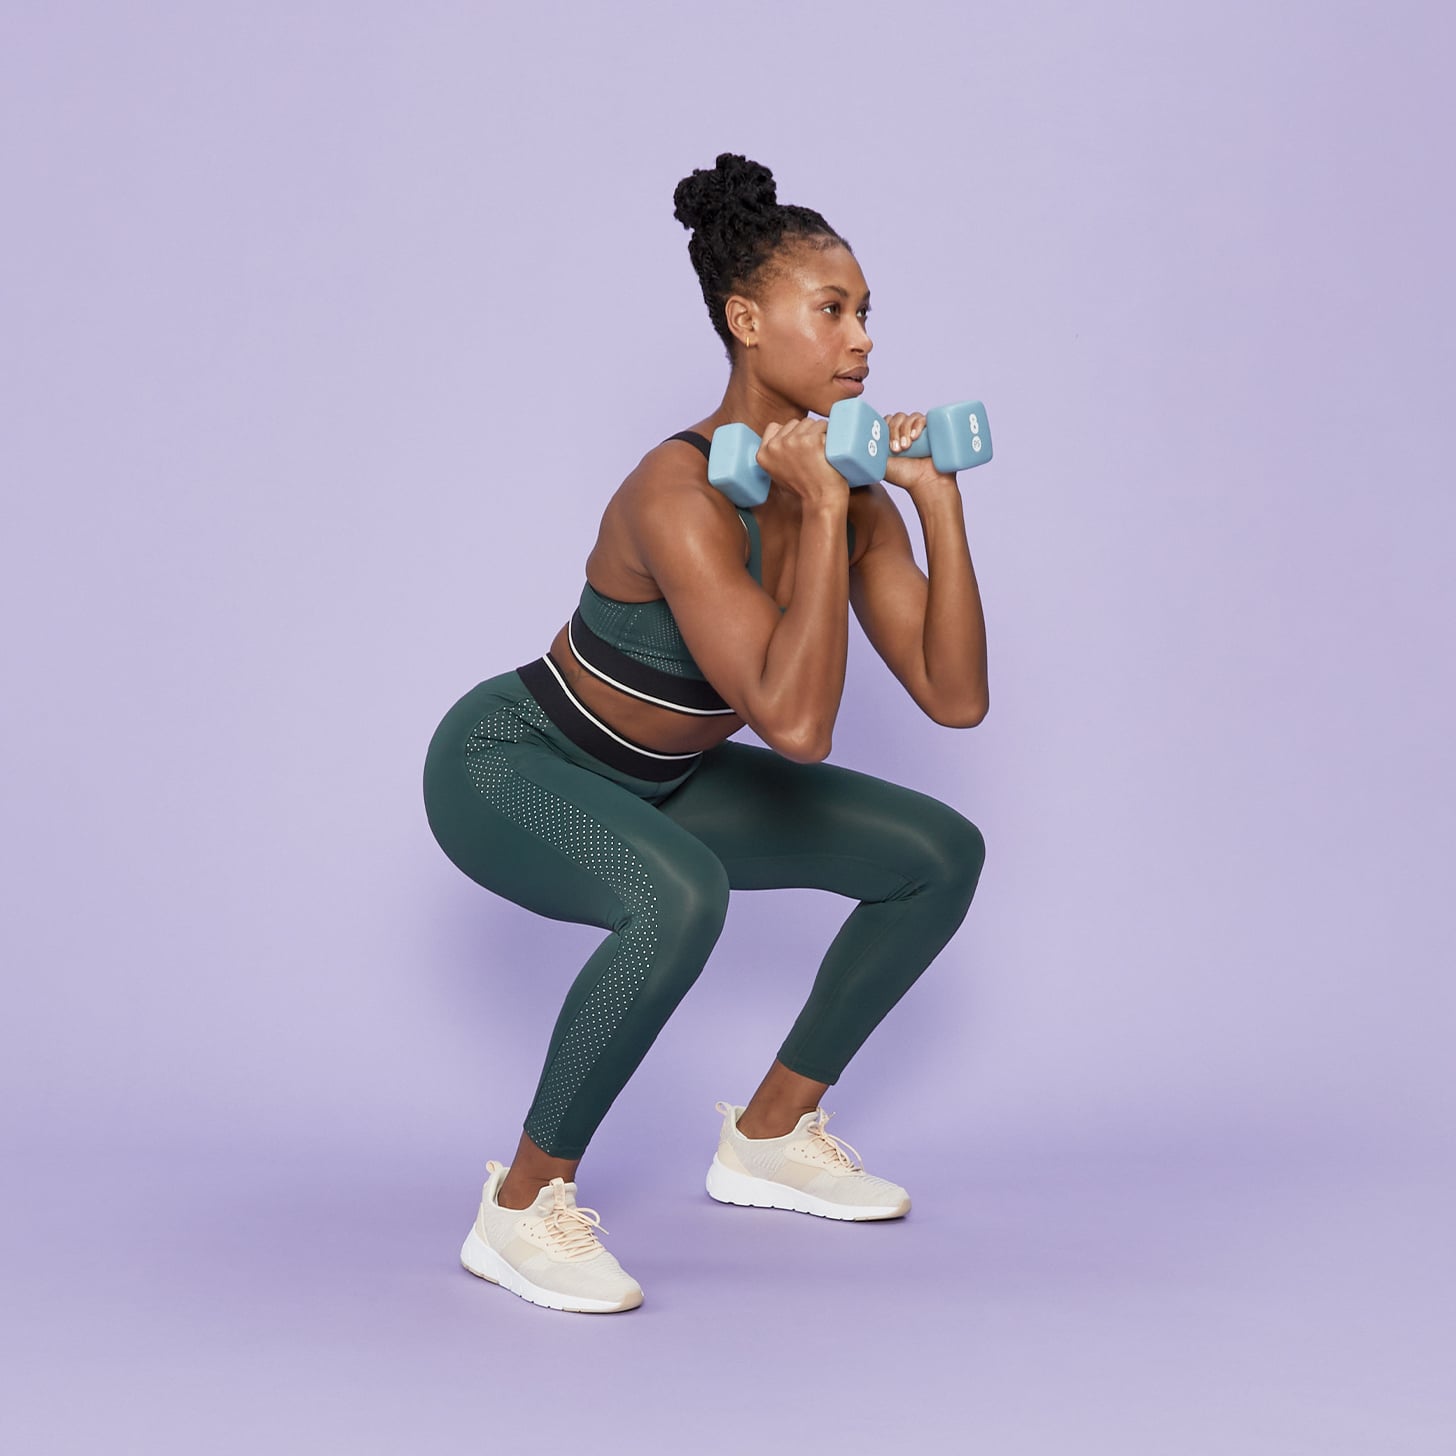 HIIT Workout For Weight Loss | POPSUGAR Fitness